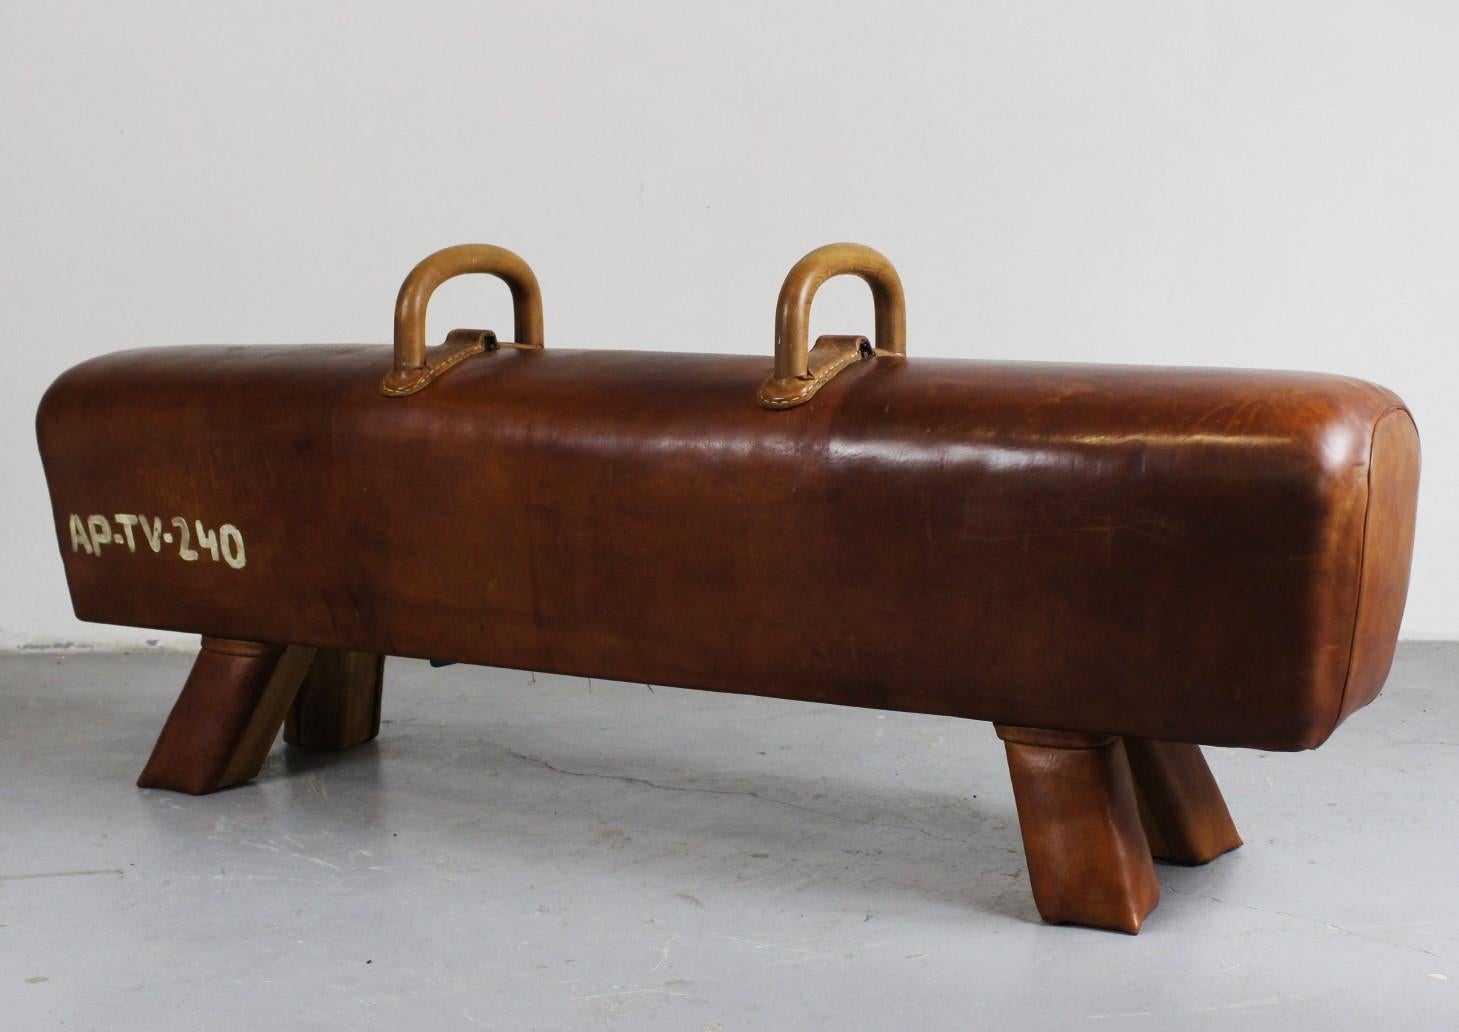 Leather gym pommel horse bench with handles, from the 1940s. The bench is in very good condition, nice patina.